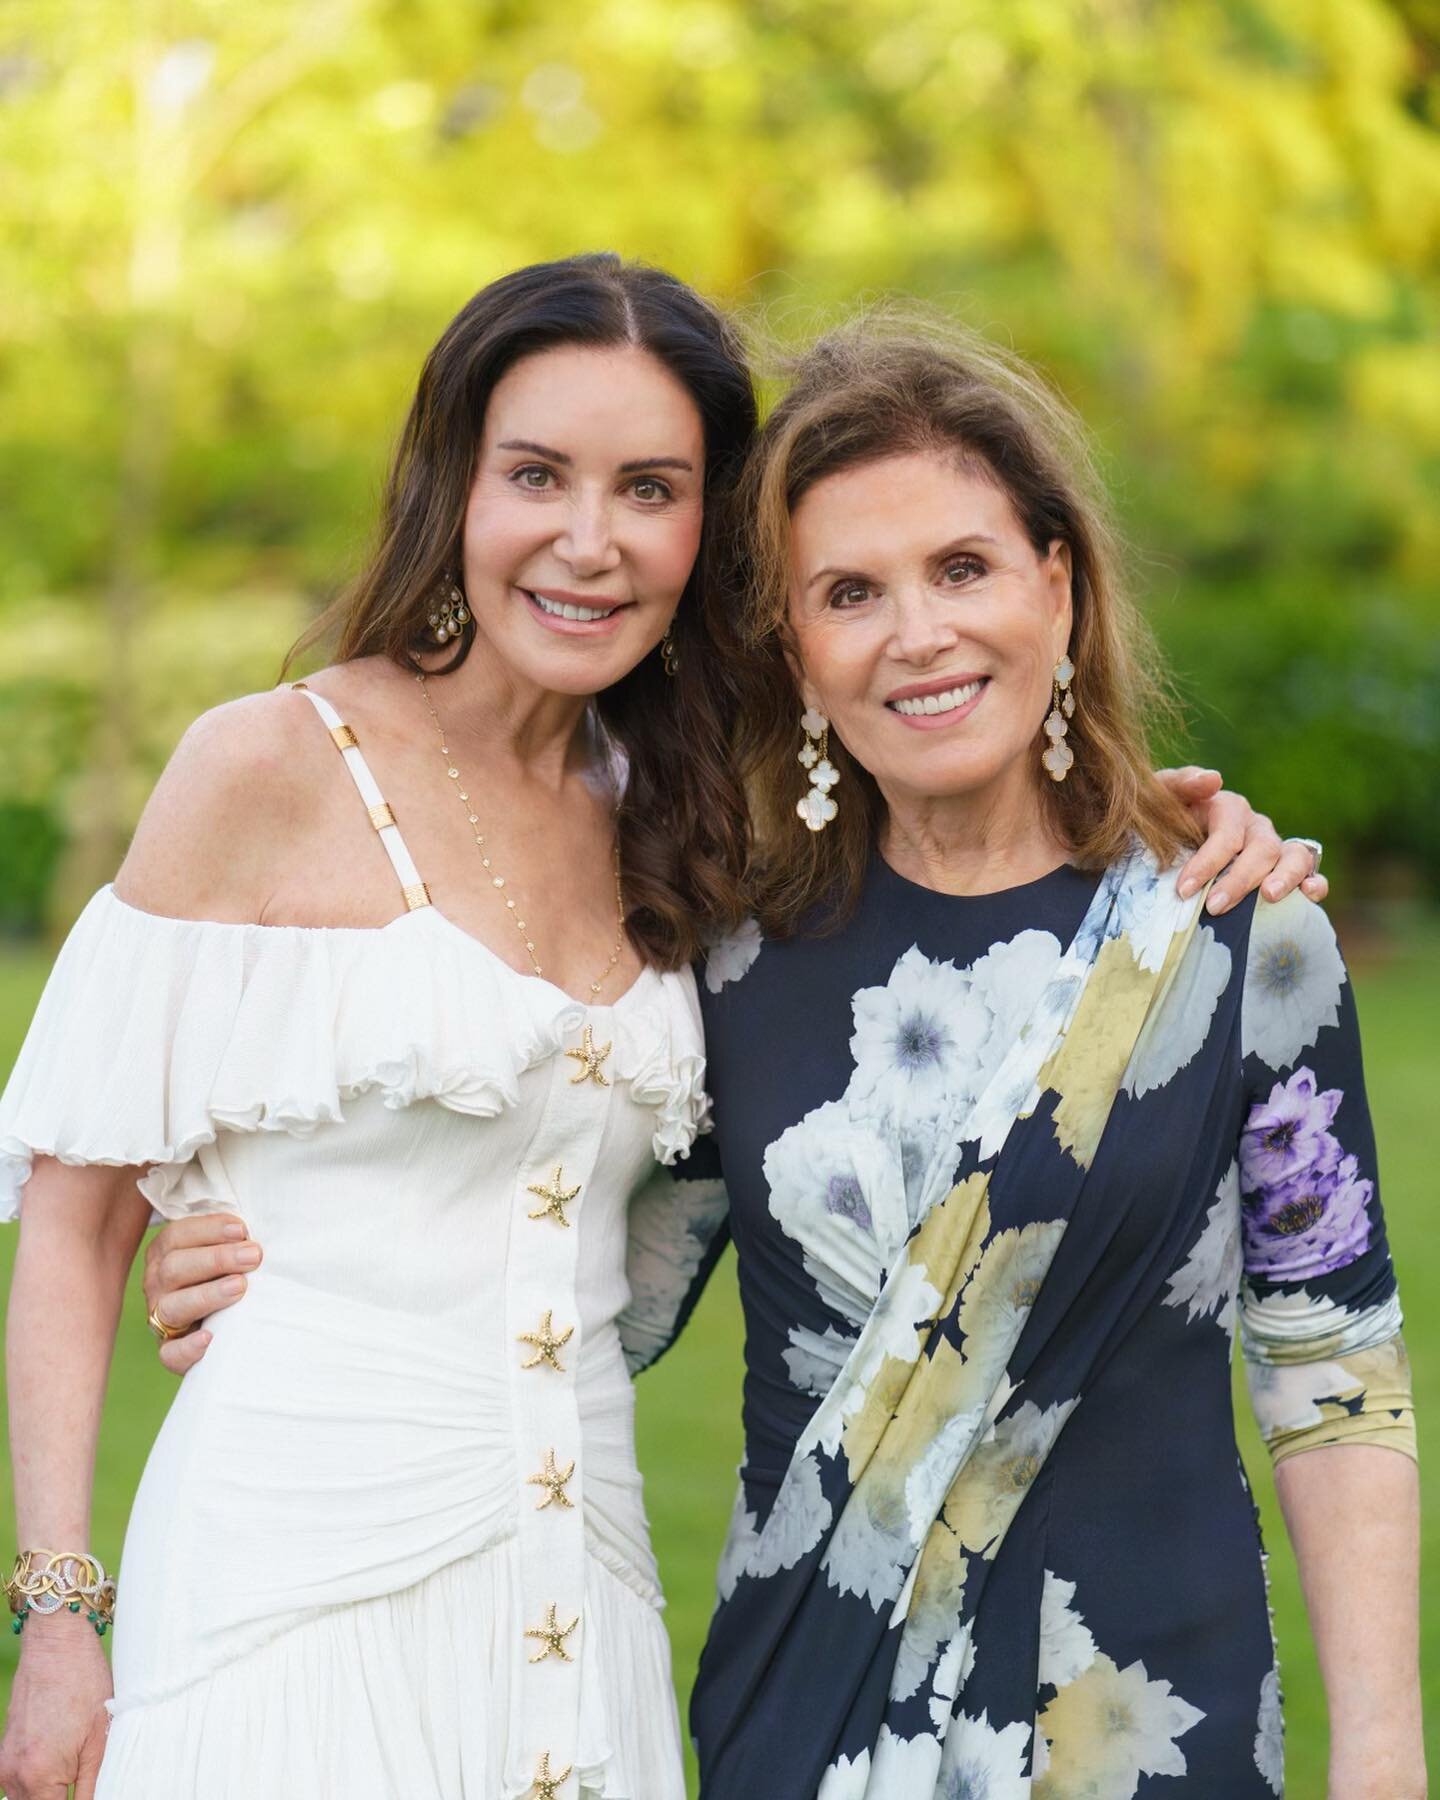 Bonnie, you are and always have been the greatest big sister a girl could ask for . Your generosity, thoughtfulness, inclusiveness and guidance have no bounds. Your creativity, talent and perseverance are undeniable. Wishing you the best birthday and